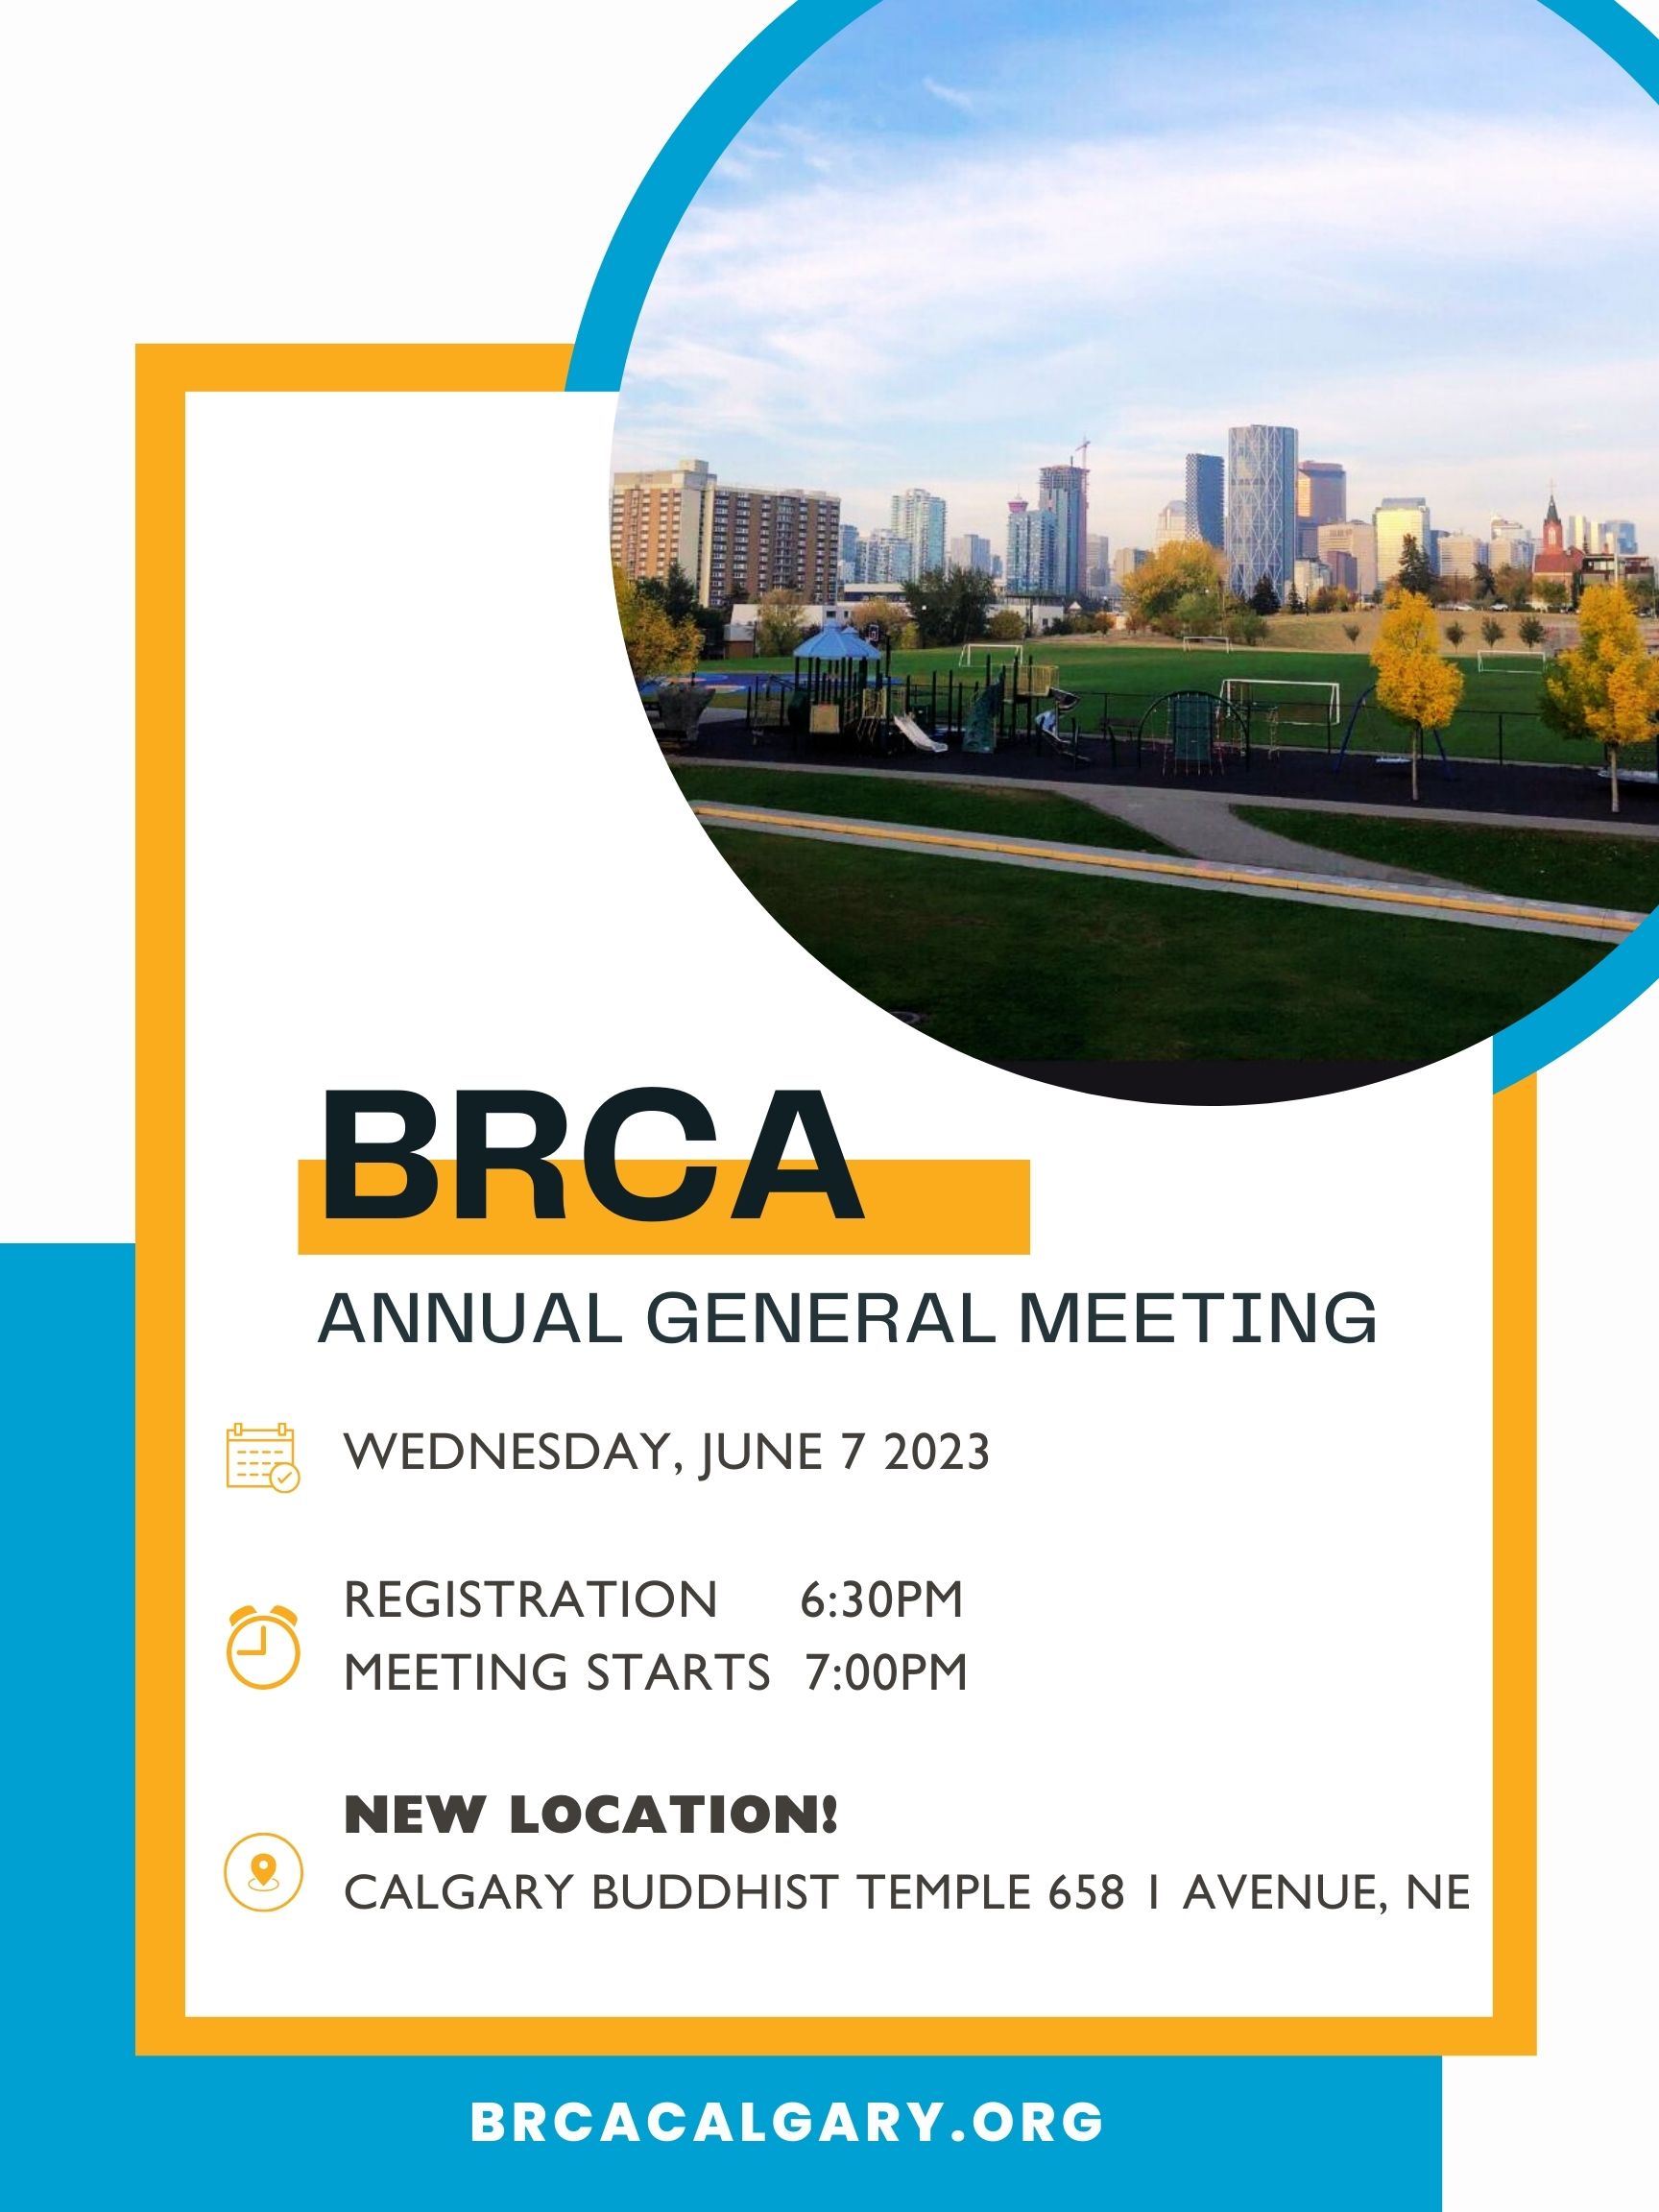 BRCA Annual General Meeting May 26, 2022